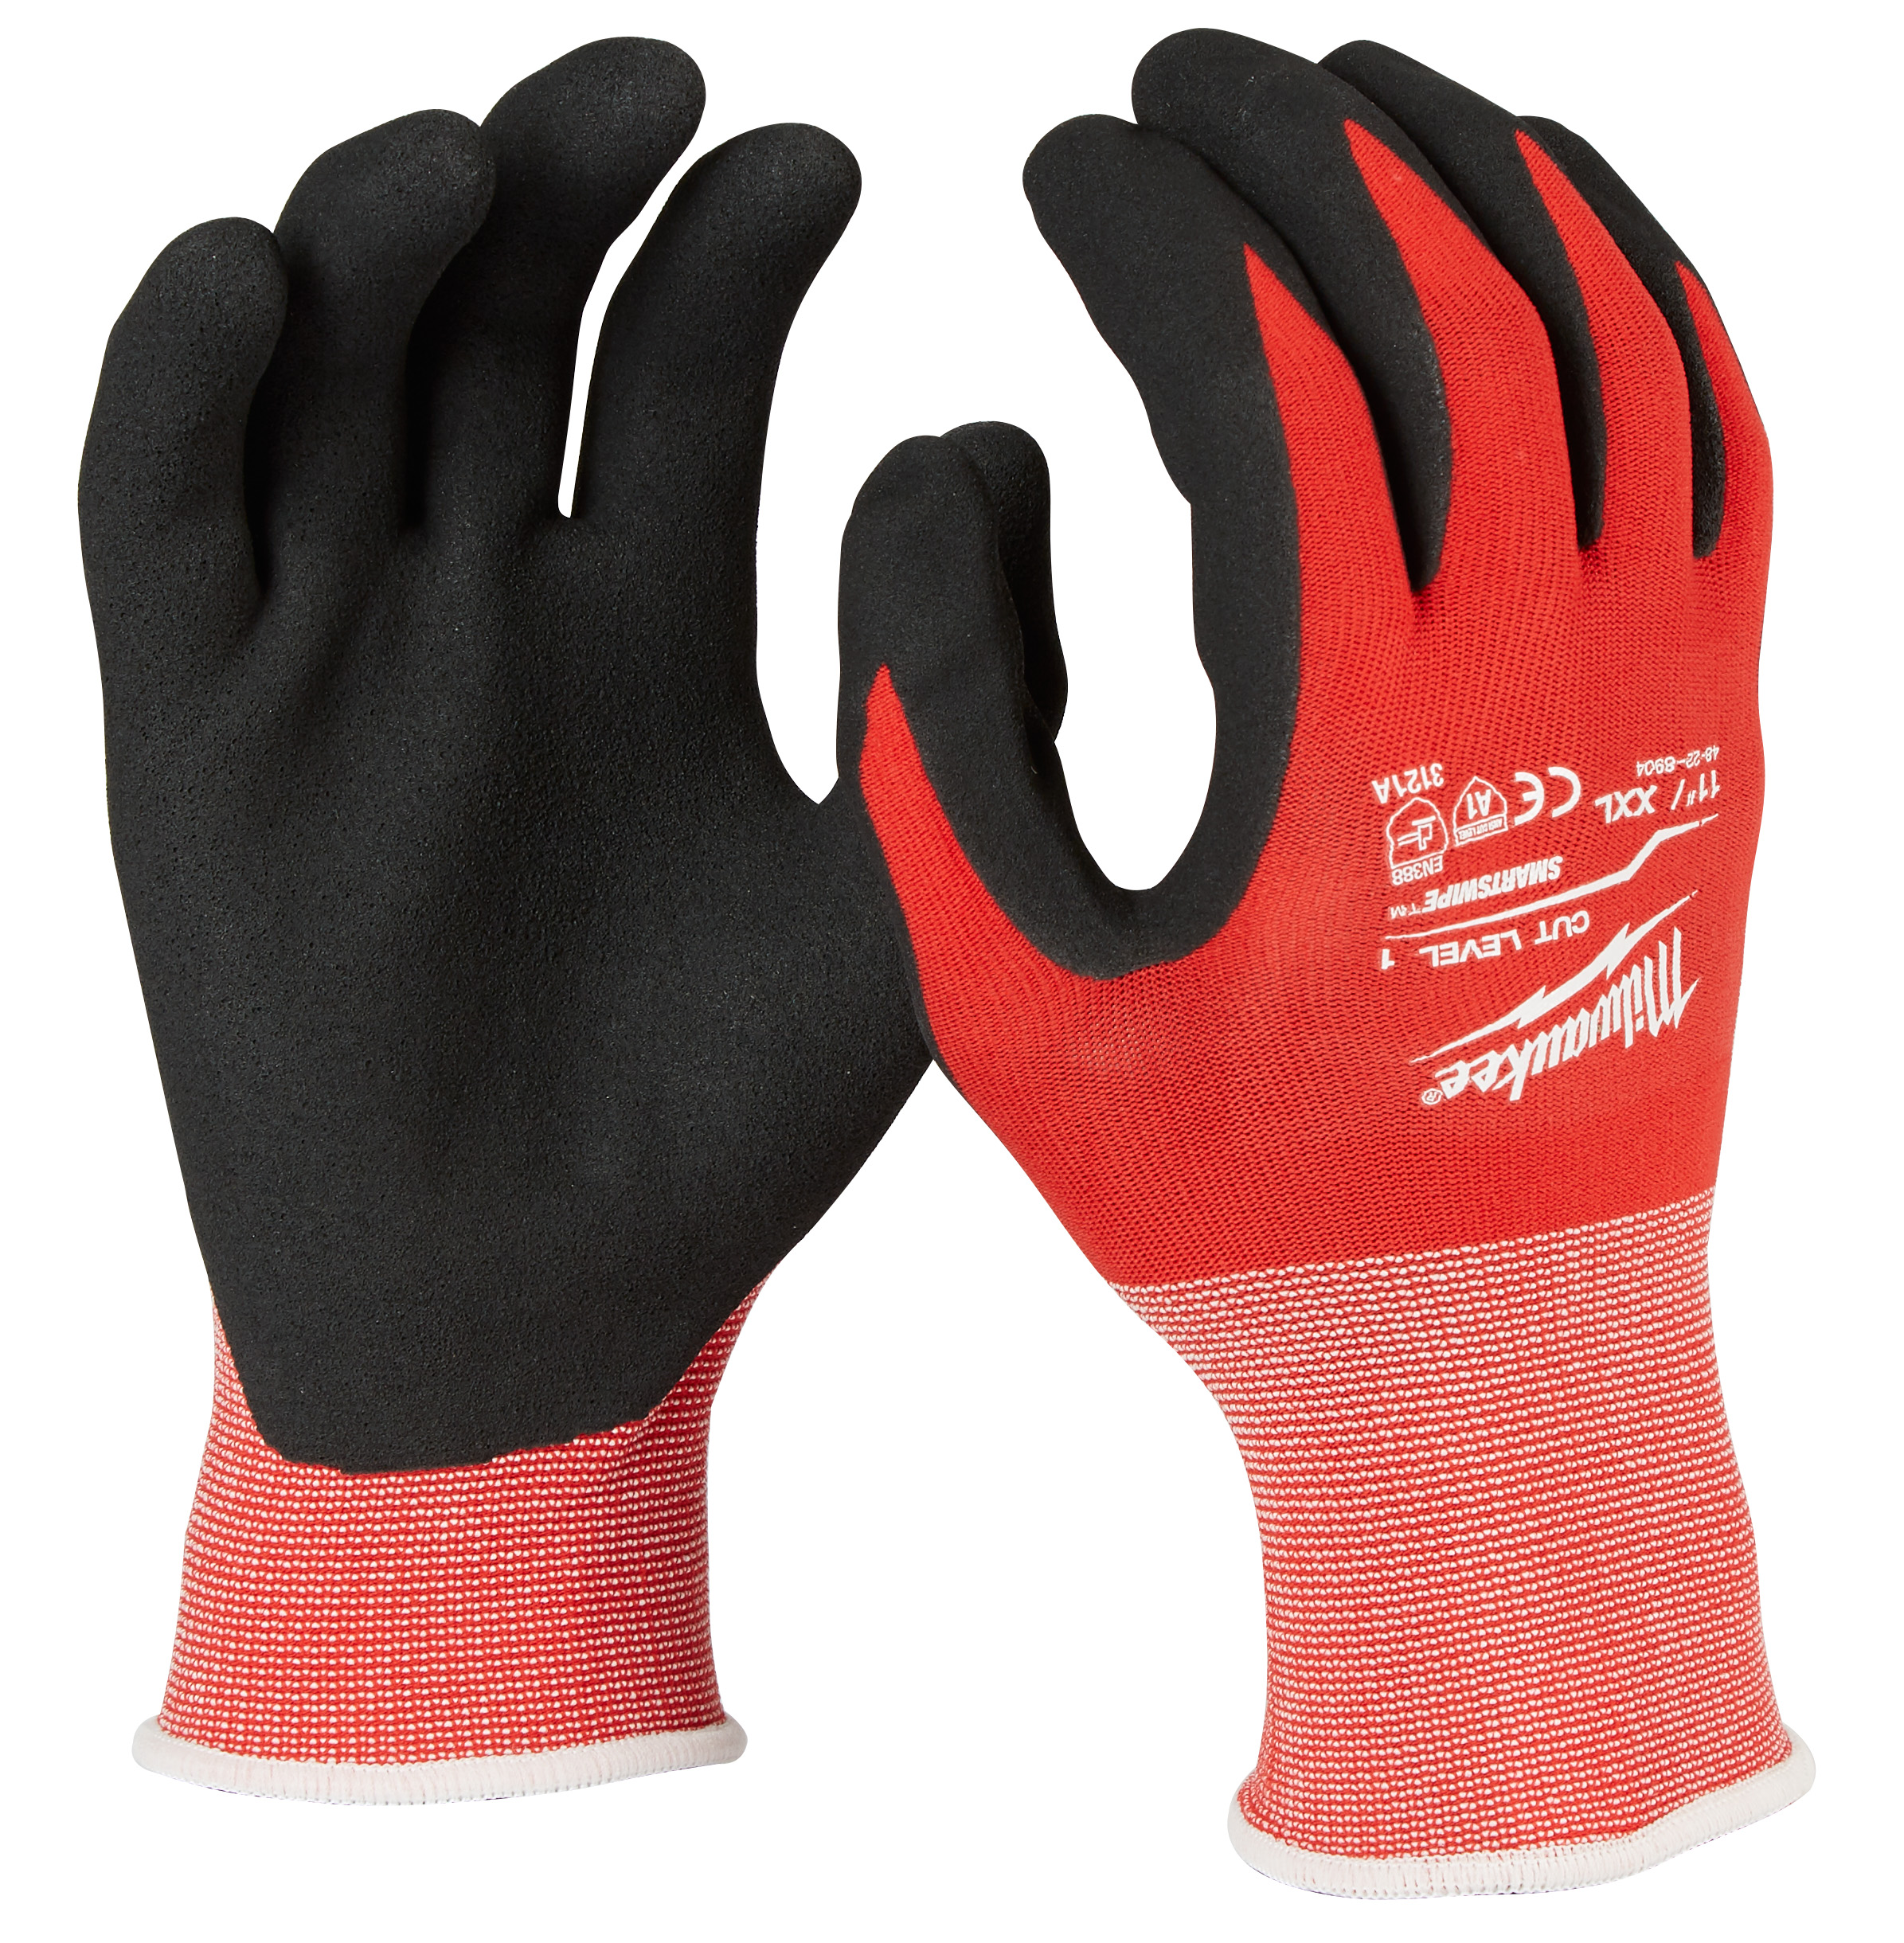 Milwaukee® 48-22-8904 Breathable Unisex Gloves, 2XL, Nylon/Lycra Blend, Knit Cuff, Resists: Cut and Puncture, ANSI Cut-Resistance Level: A1, ANSI Puncture-Resistance Level: 1